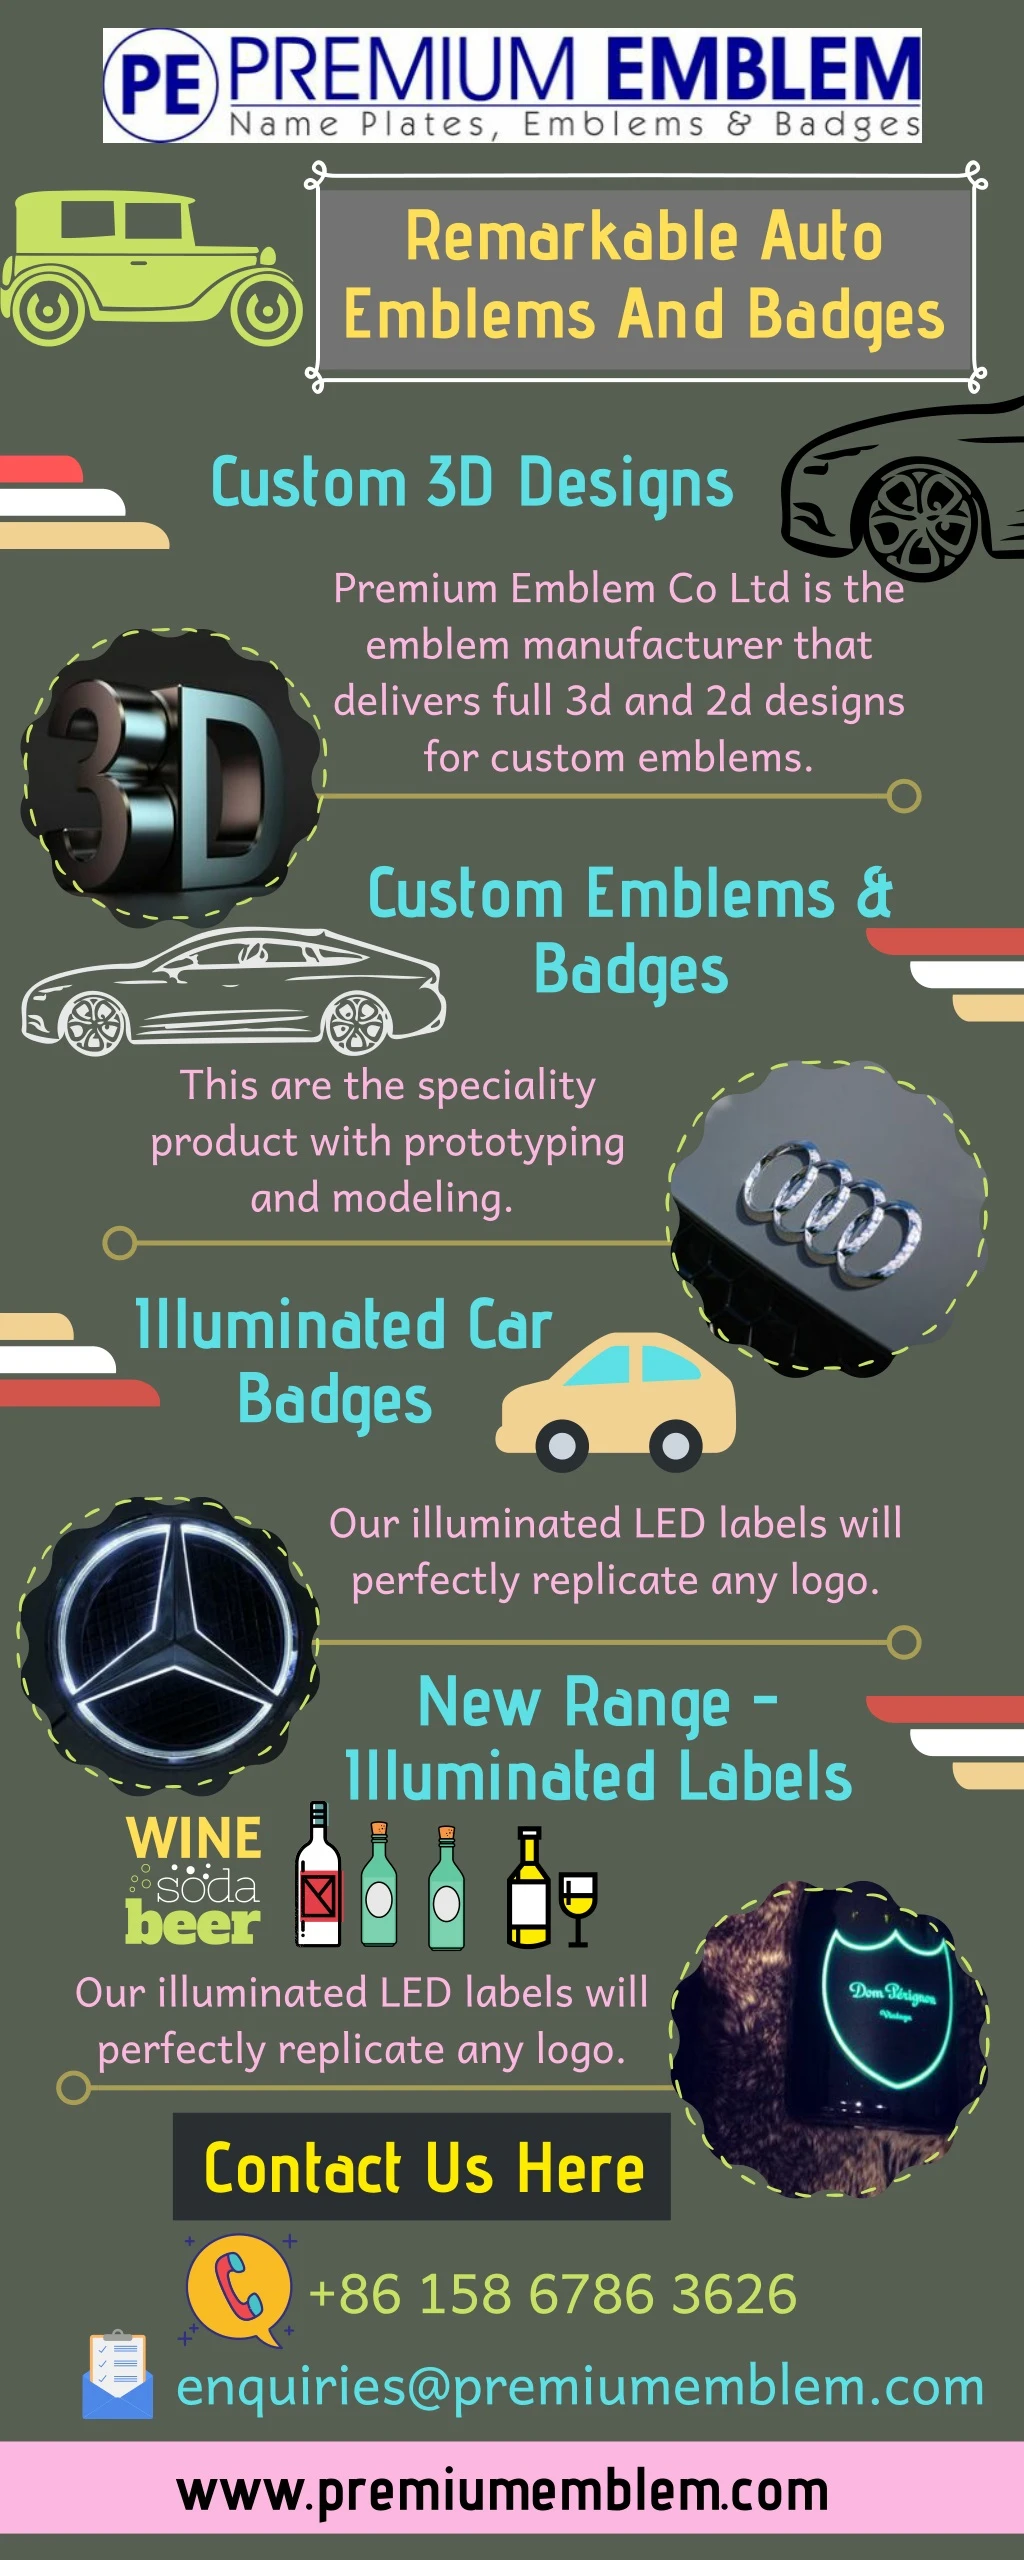 remarkable auto emblems and badges